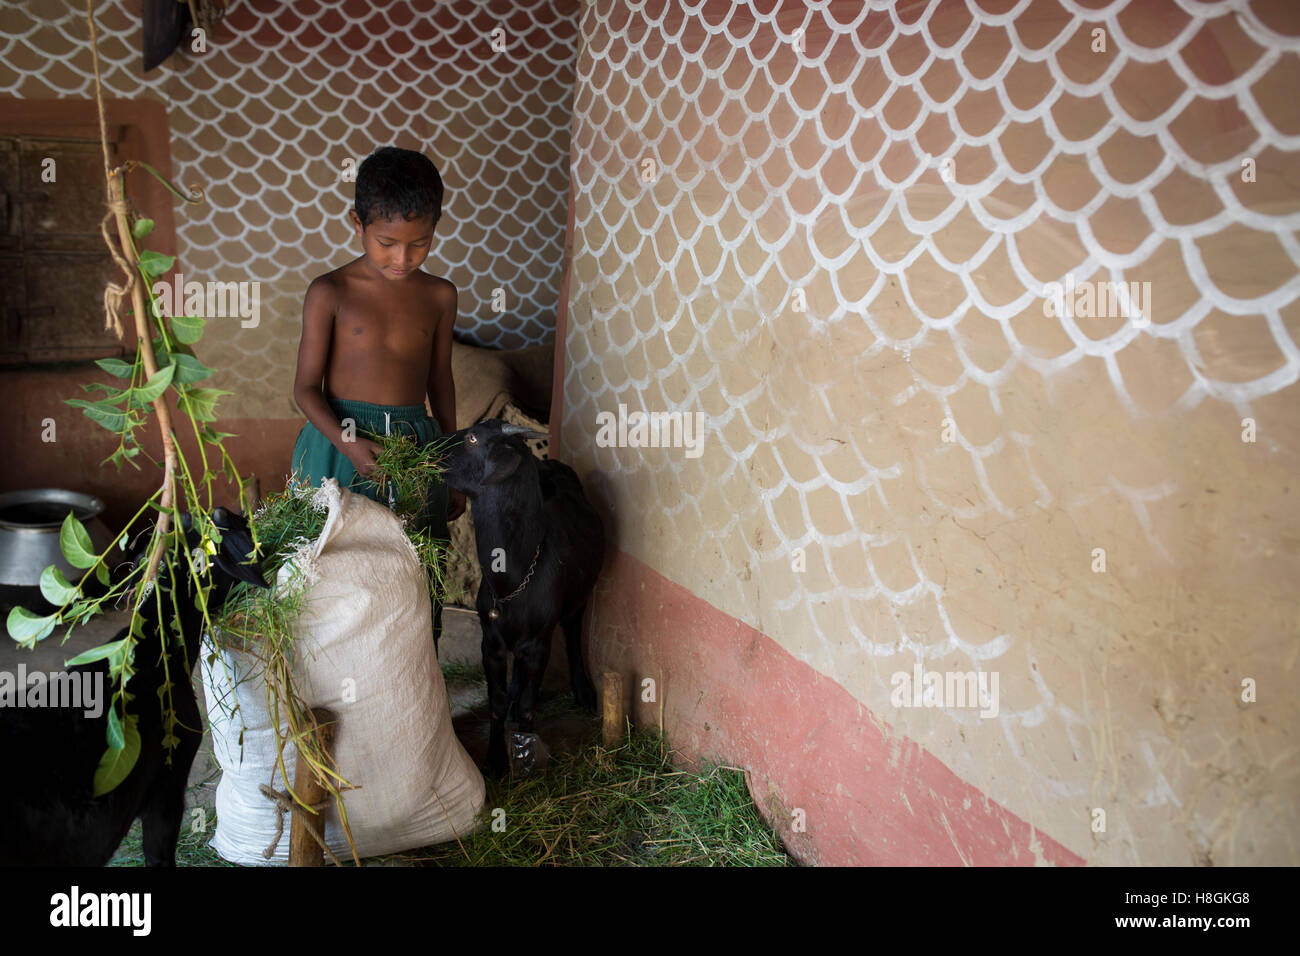 North Bengal, Bangladesh. 11th November, 2016. A child feeding their goat in North Bengal in Bangladesh, on November 10, 2016. lifestyle and view of houses of a rural village in Bangladesh. These houses are made by mud and  the walls are beautifully painted using natural colours and the interiors.Santal tribe and hindu people are living these houses.The village paintings are considered auspicious symbols related to fertility and fecundity being painted on the walls. Credit:  zakir hossain chowdhury zakir/Alamy Live News Stock Photo